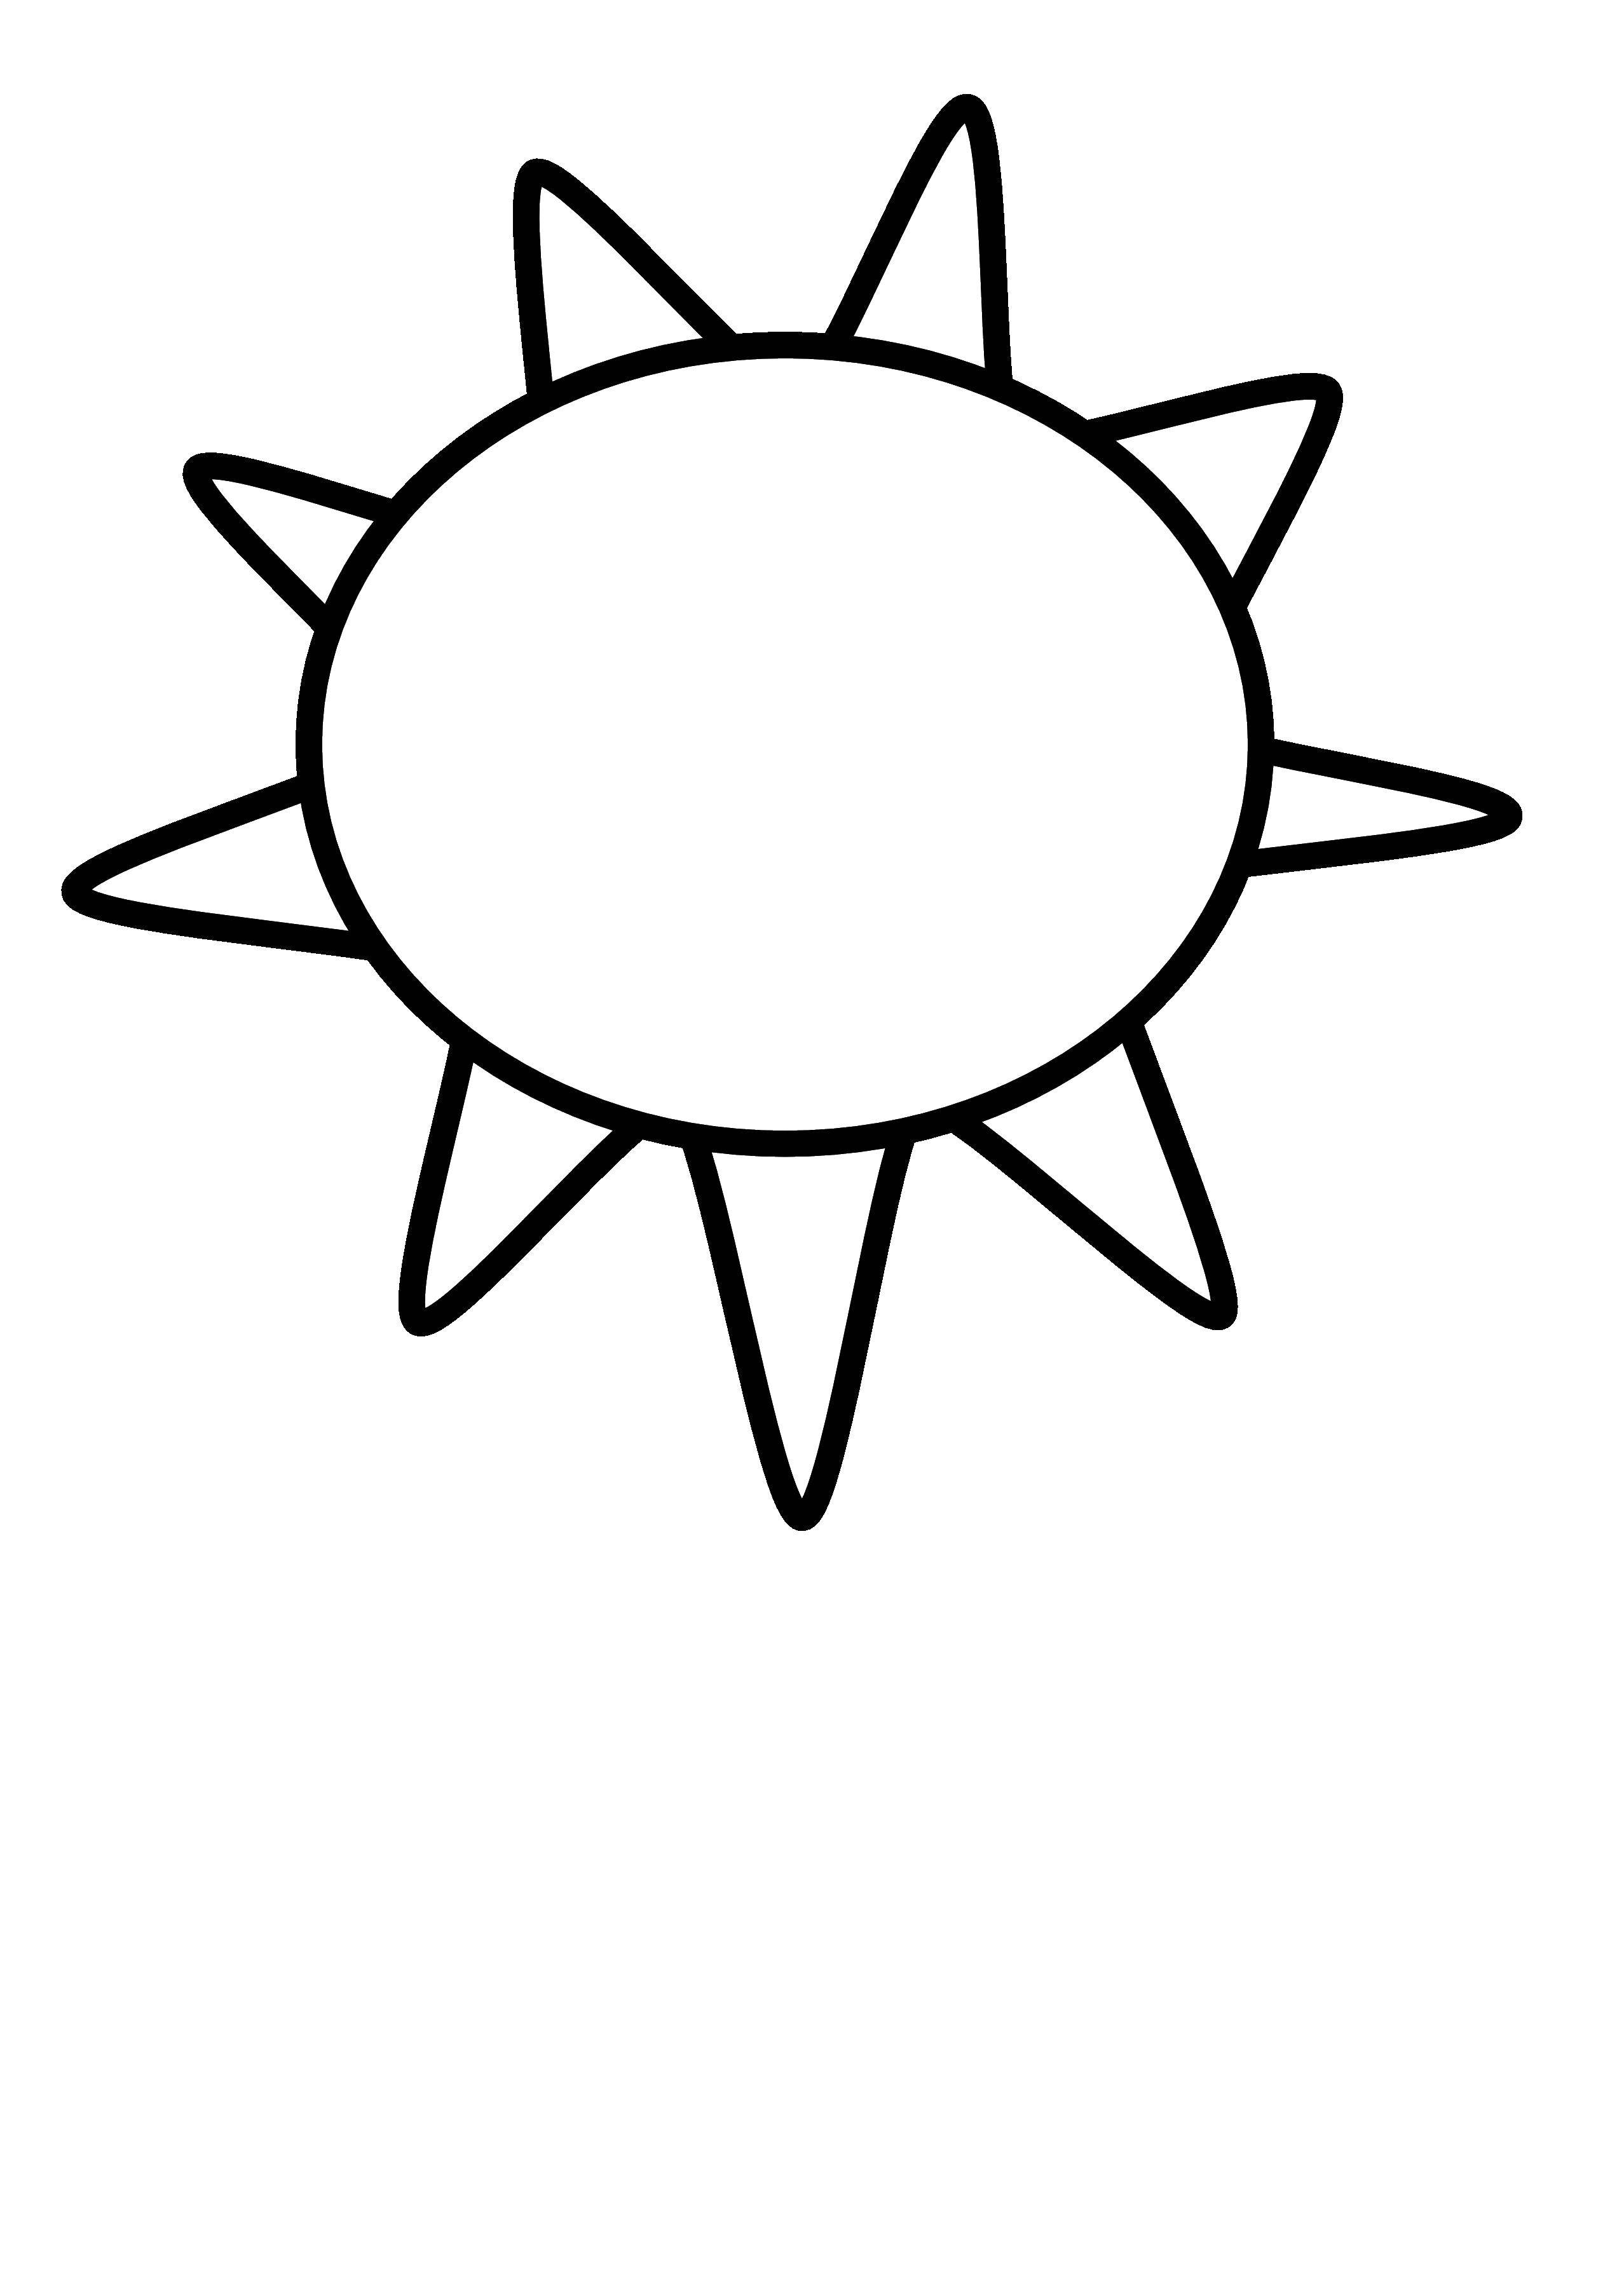 Coloring The rays of the sun. Category The contour of the sun. Tags:  Sun, rays, joy.